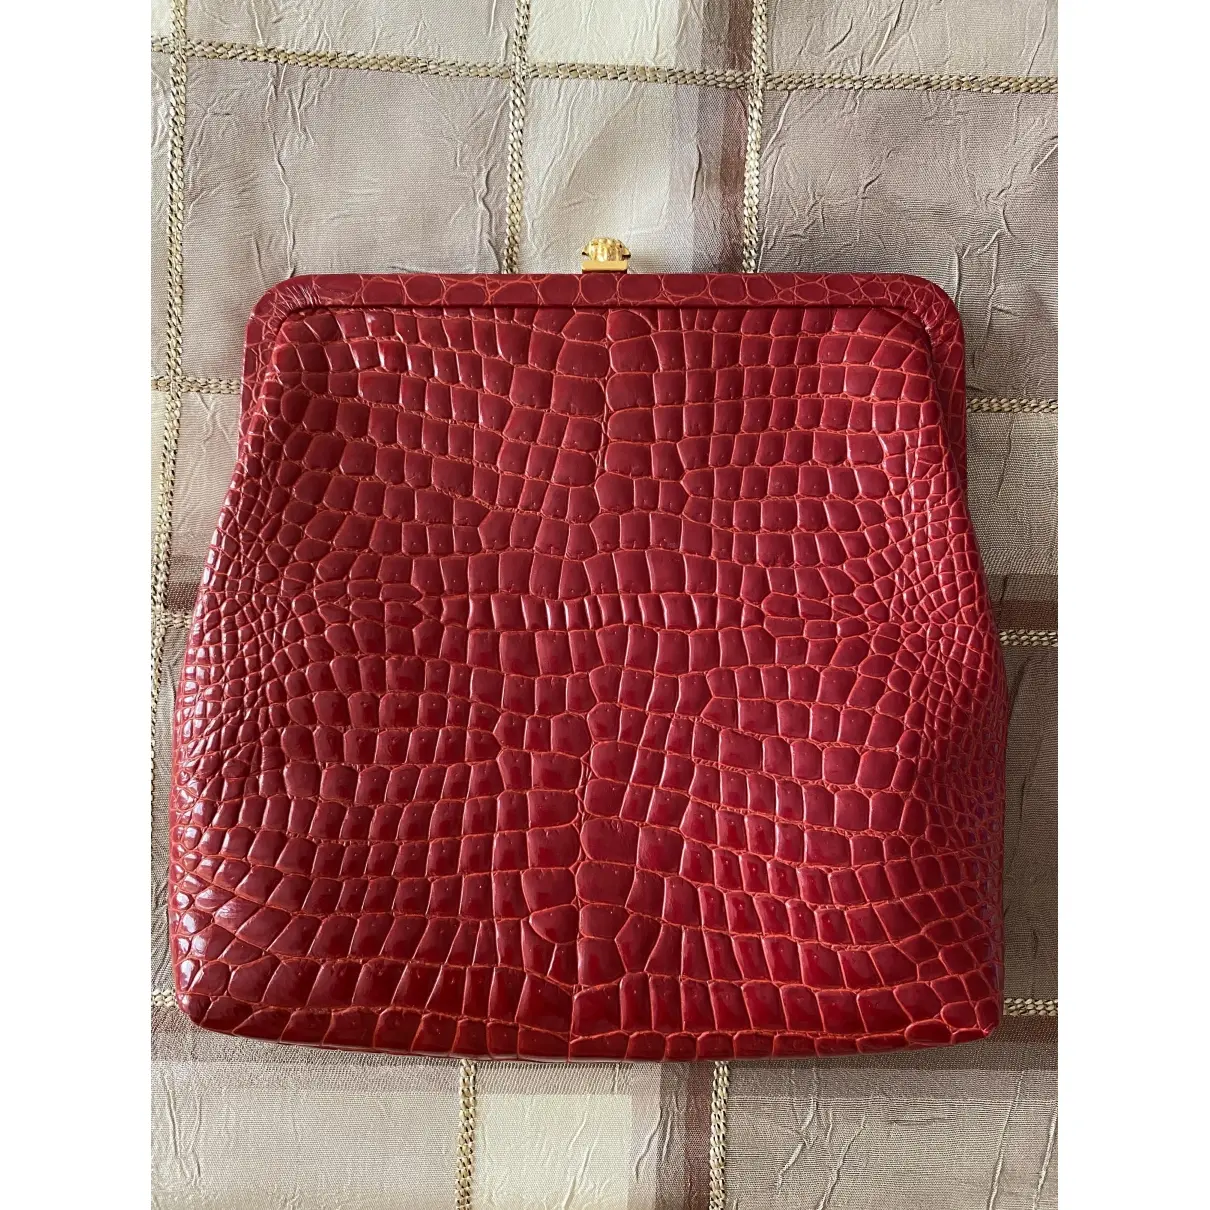 Gianni Versace Leather clutch bag for sale - Vintage